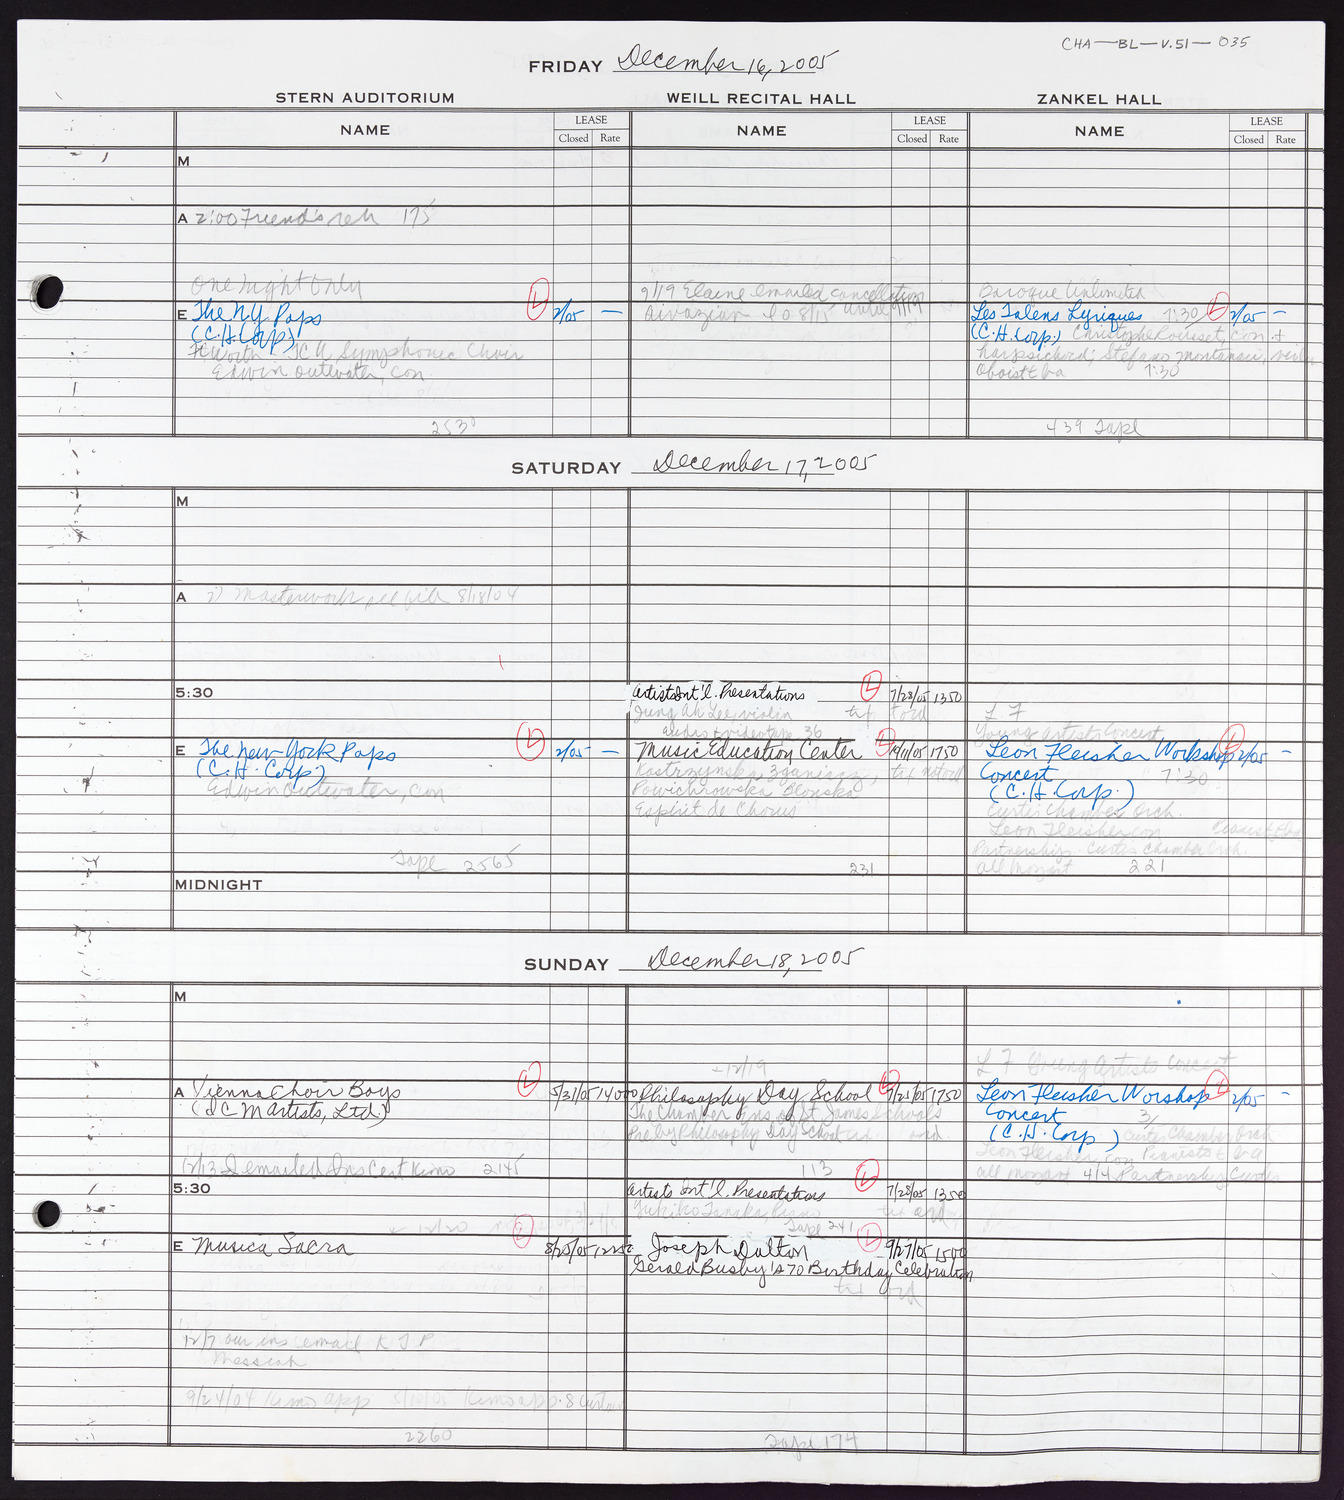 Carnegie Hall Booking Ledger, volume 51, page 35